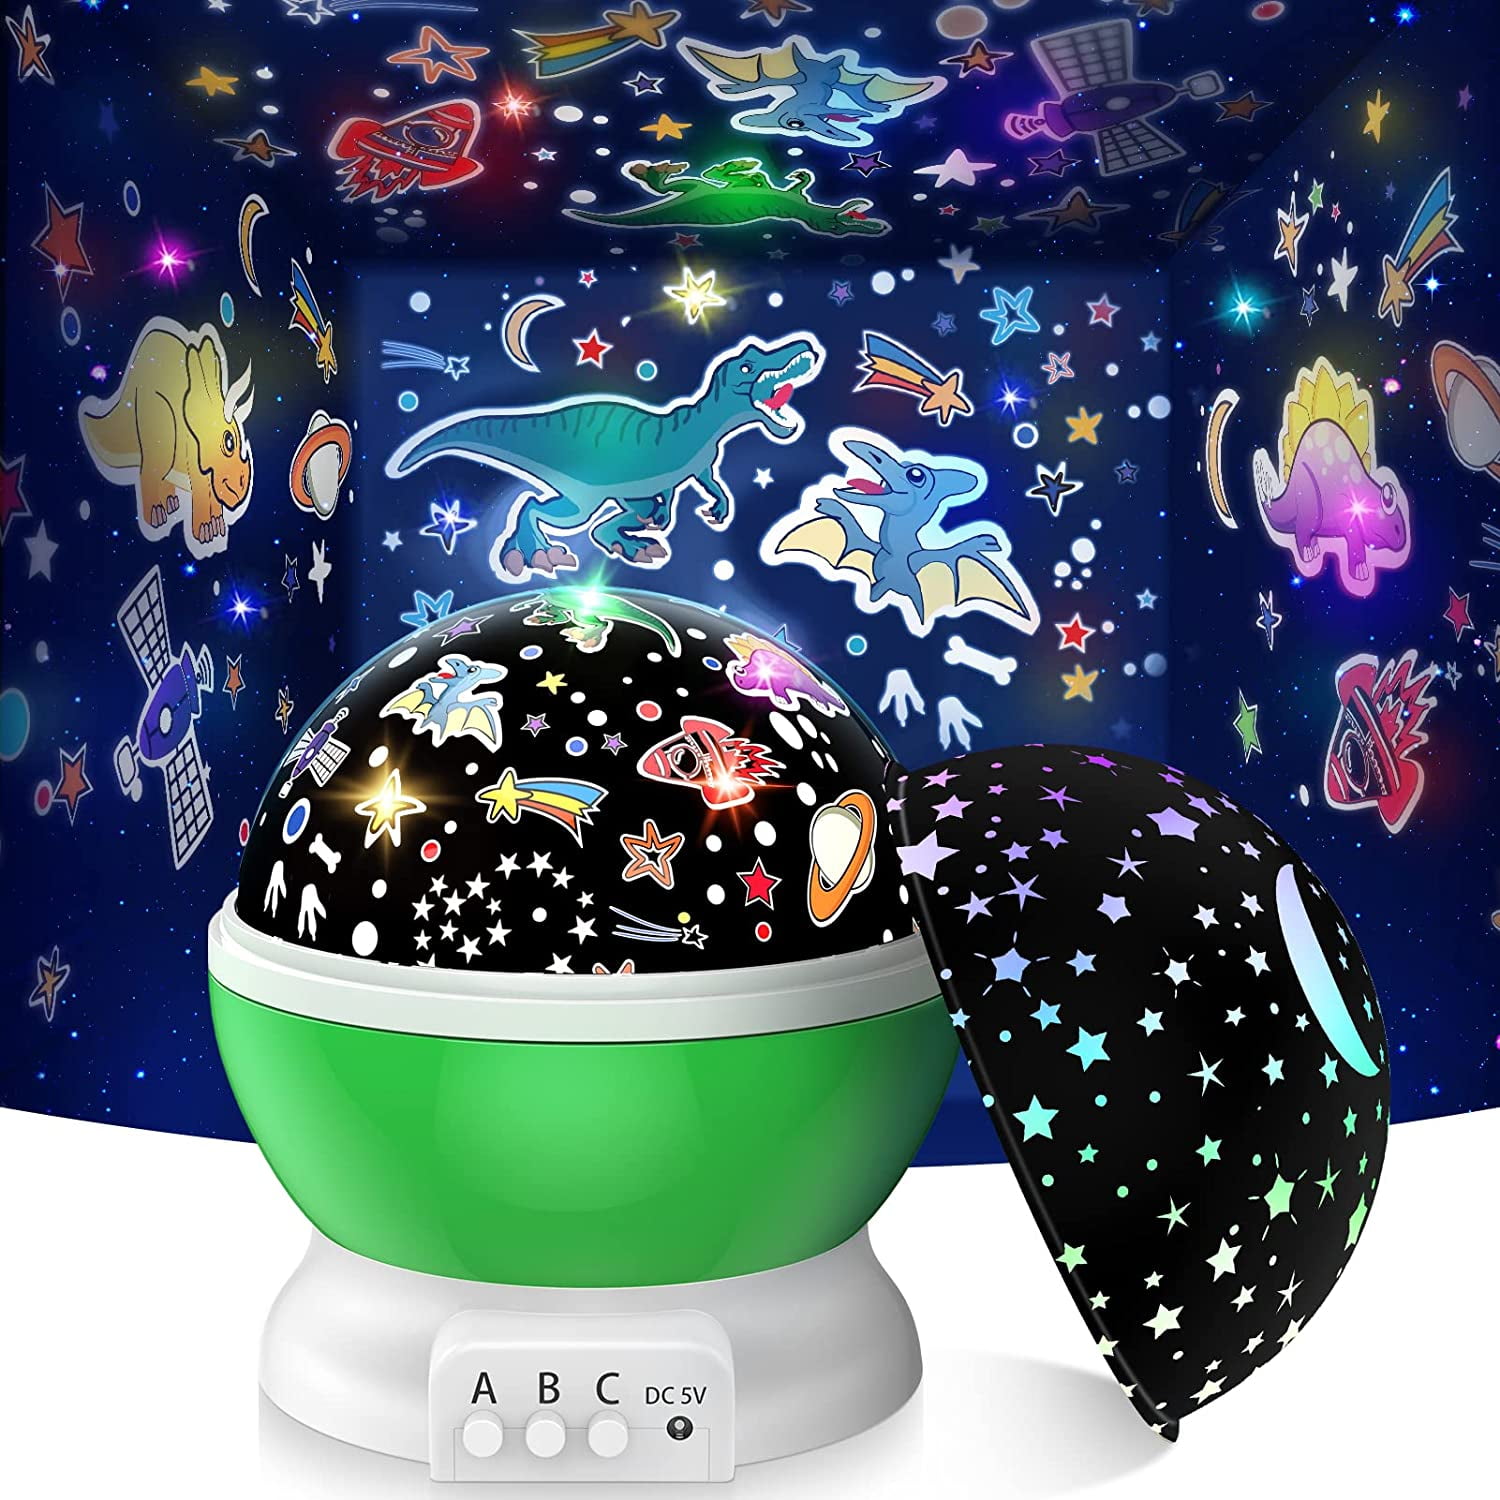 Rainbow Unicorn Smart Starry Night Lamp With Dinosaur Doll Design Perfect  For Kids Room Decor, Parties, And Valentines Day Gifts From Tabletpc2015,  $24.43